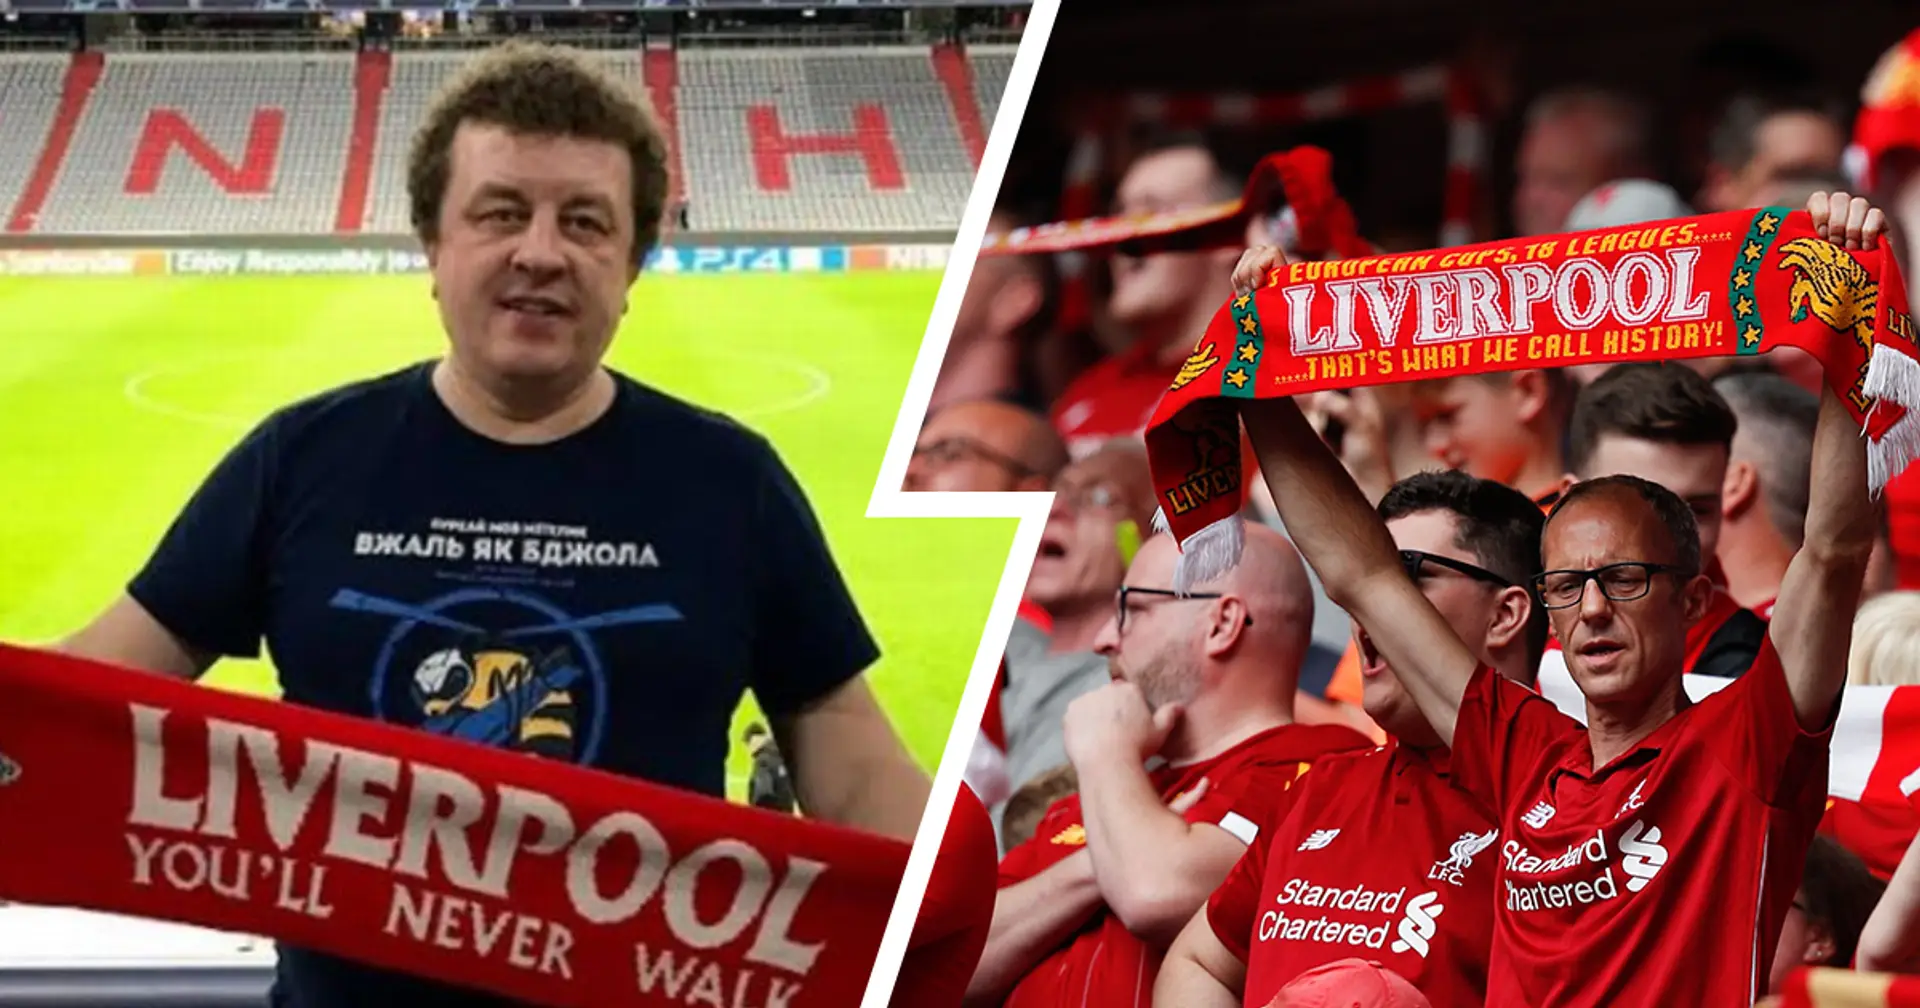 Revealed: Why Liverpool fan couldn't stop reciting Liverpool song every day in prison